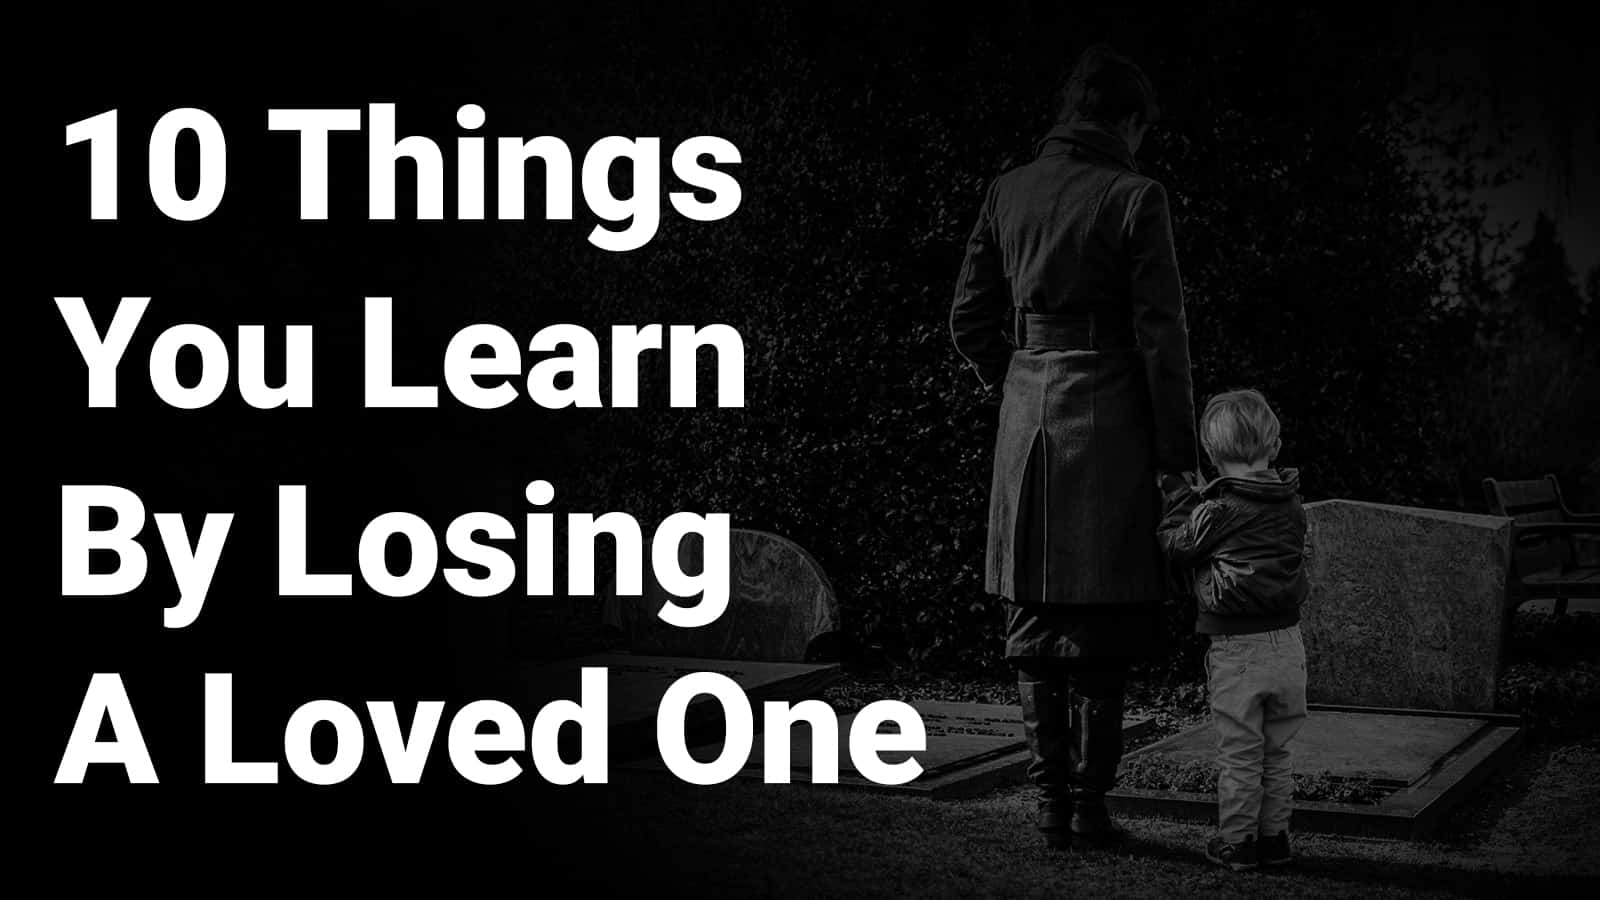 10 Things You Learn By Losing A Loved One